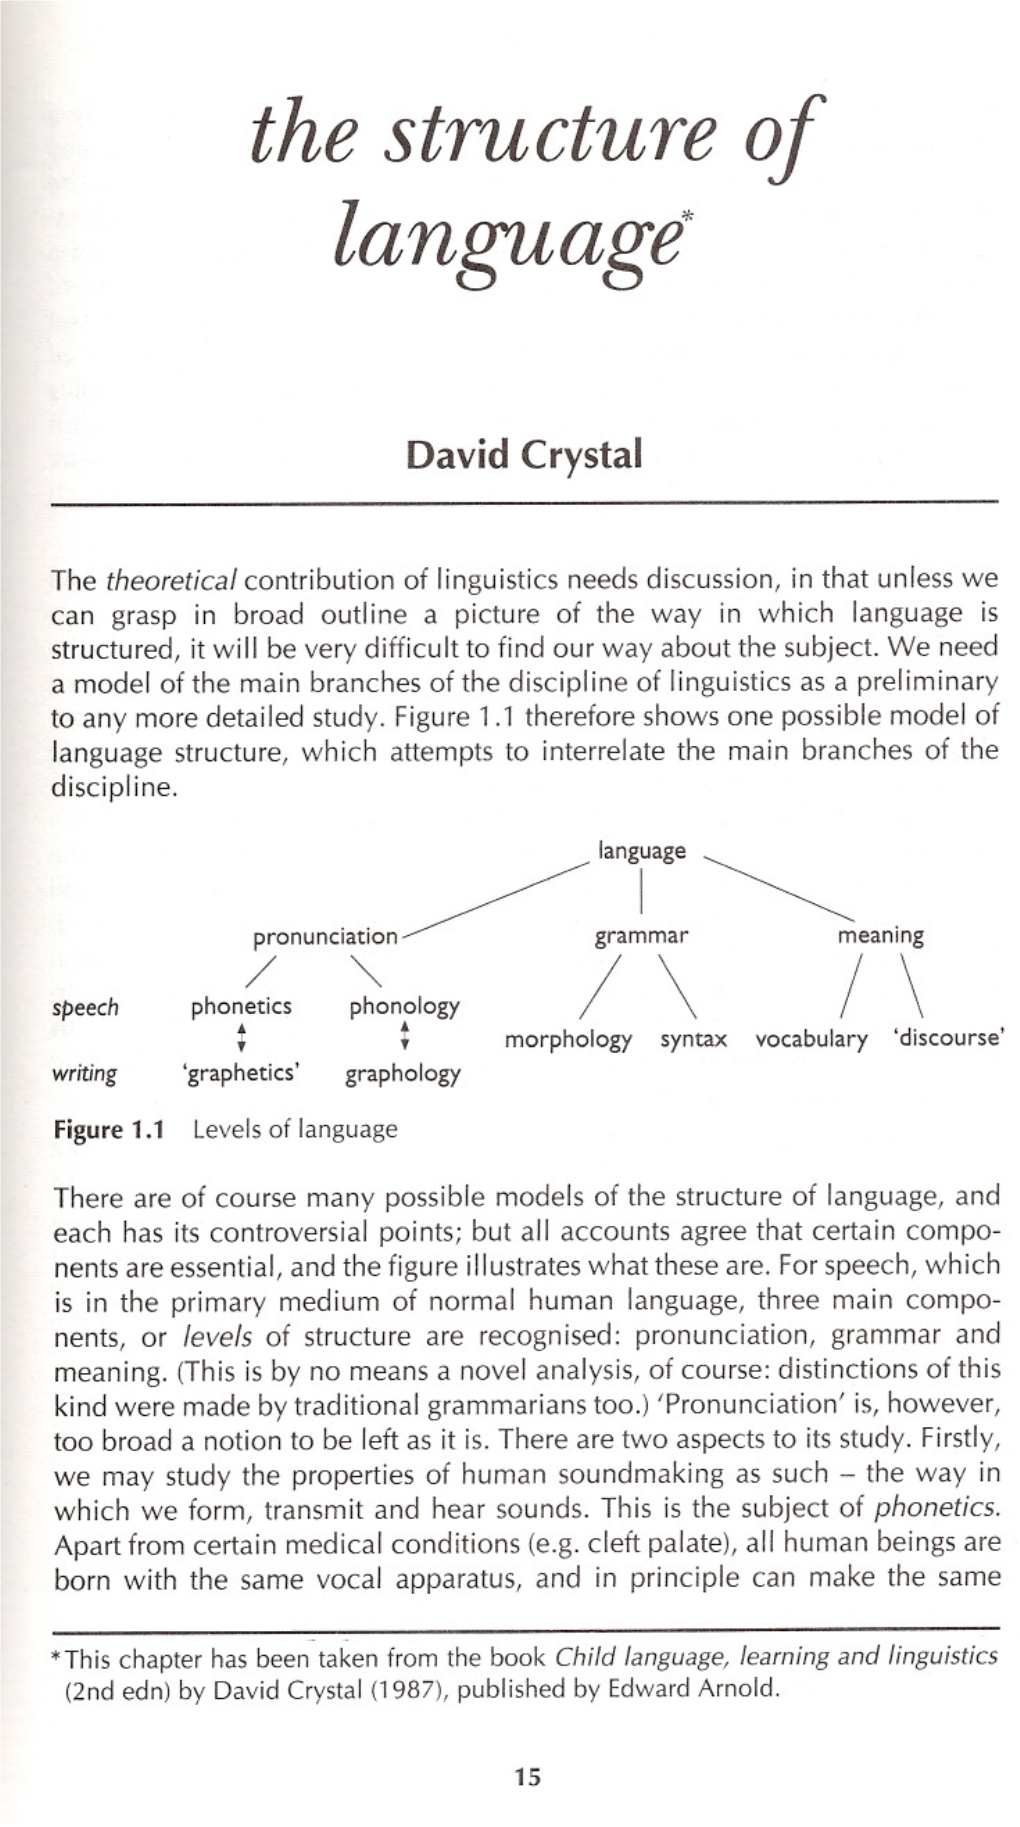 The Structure of Language'